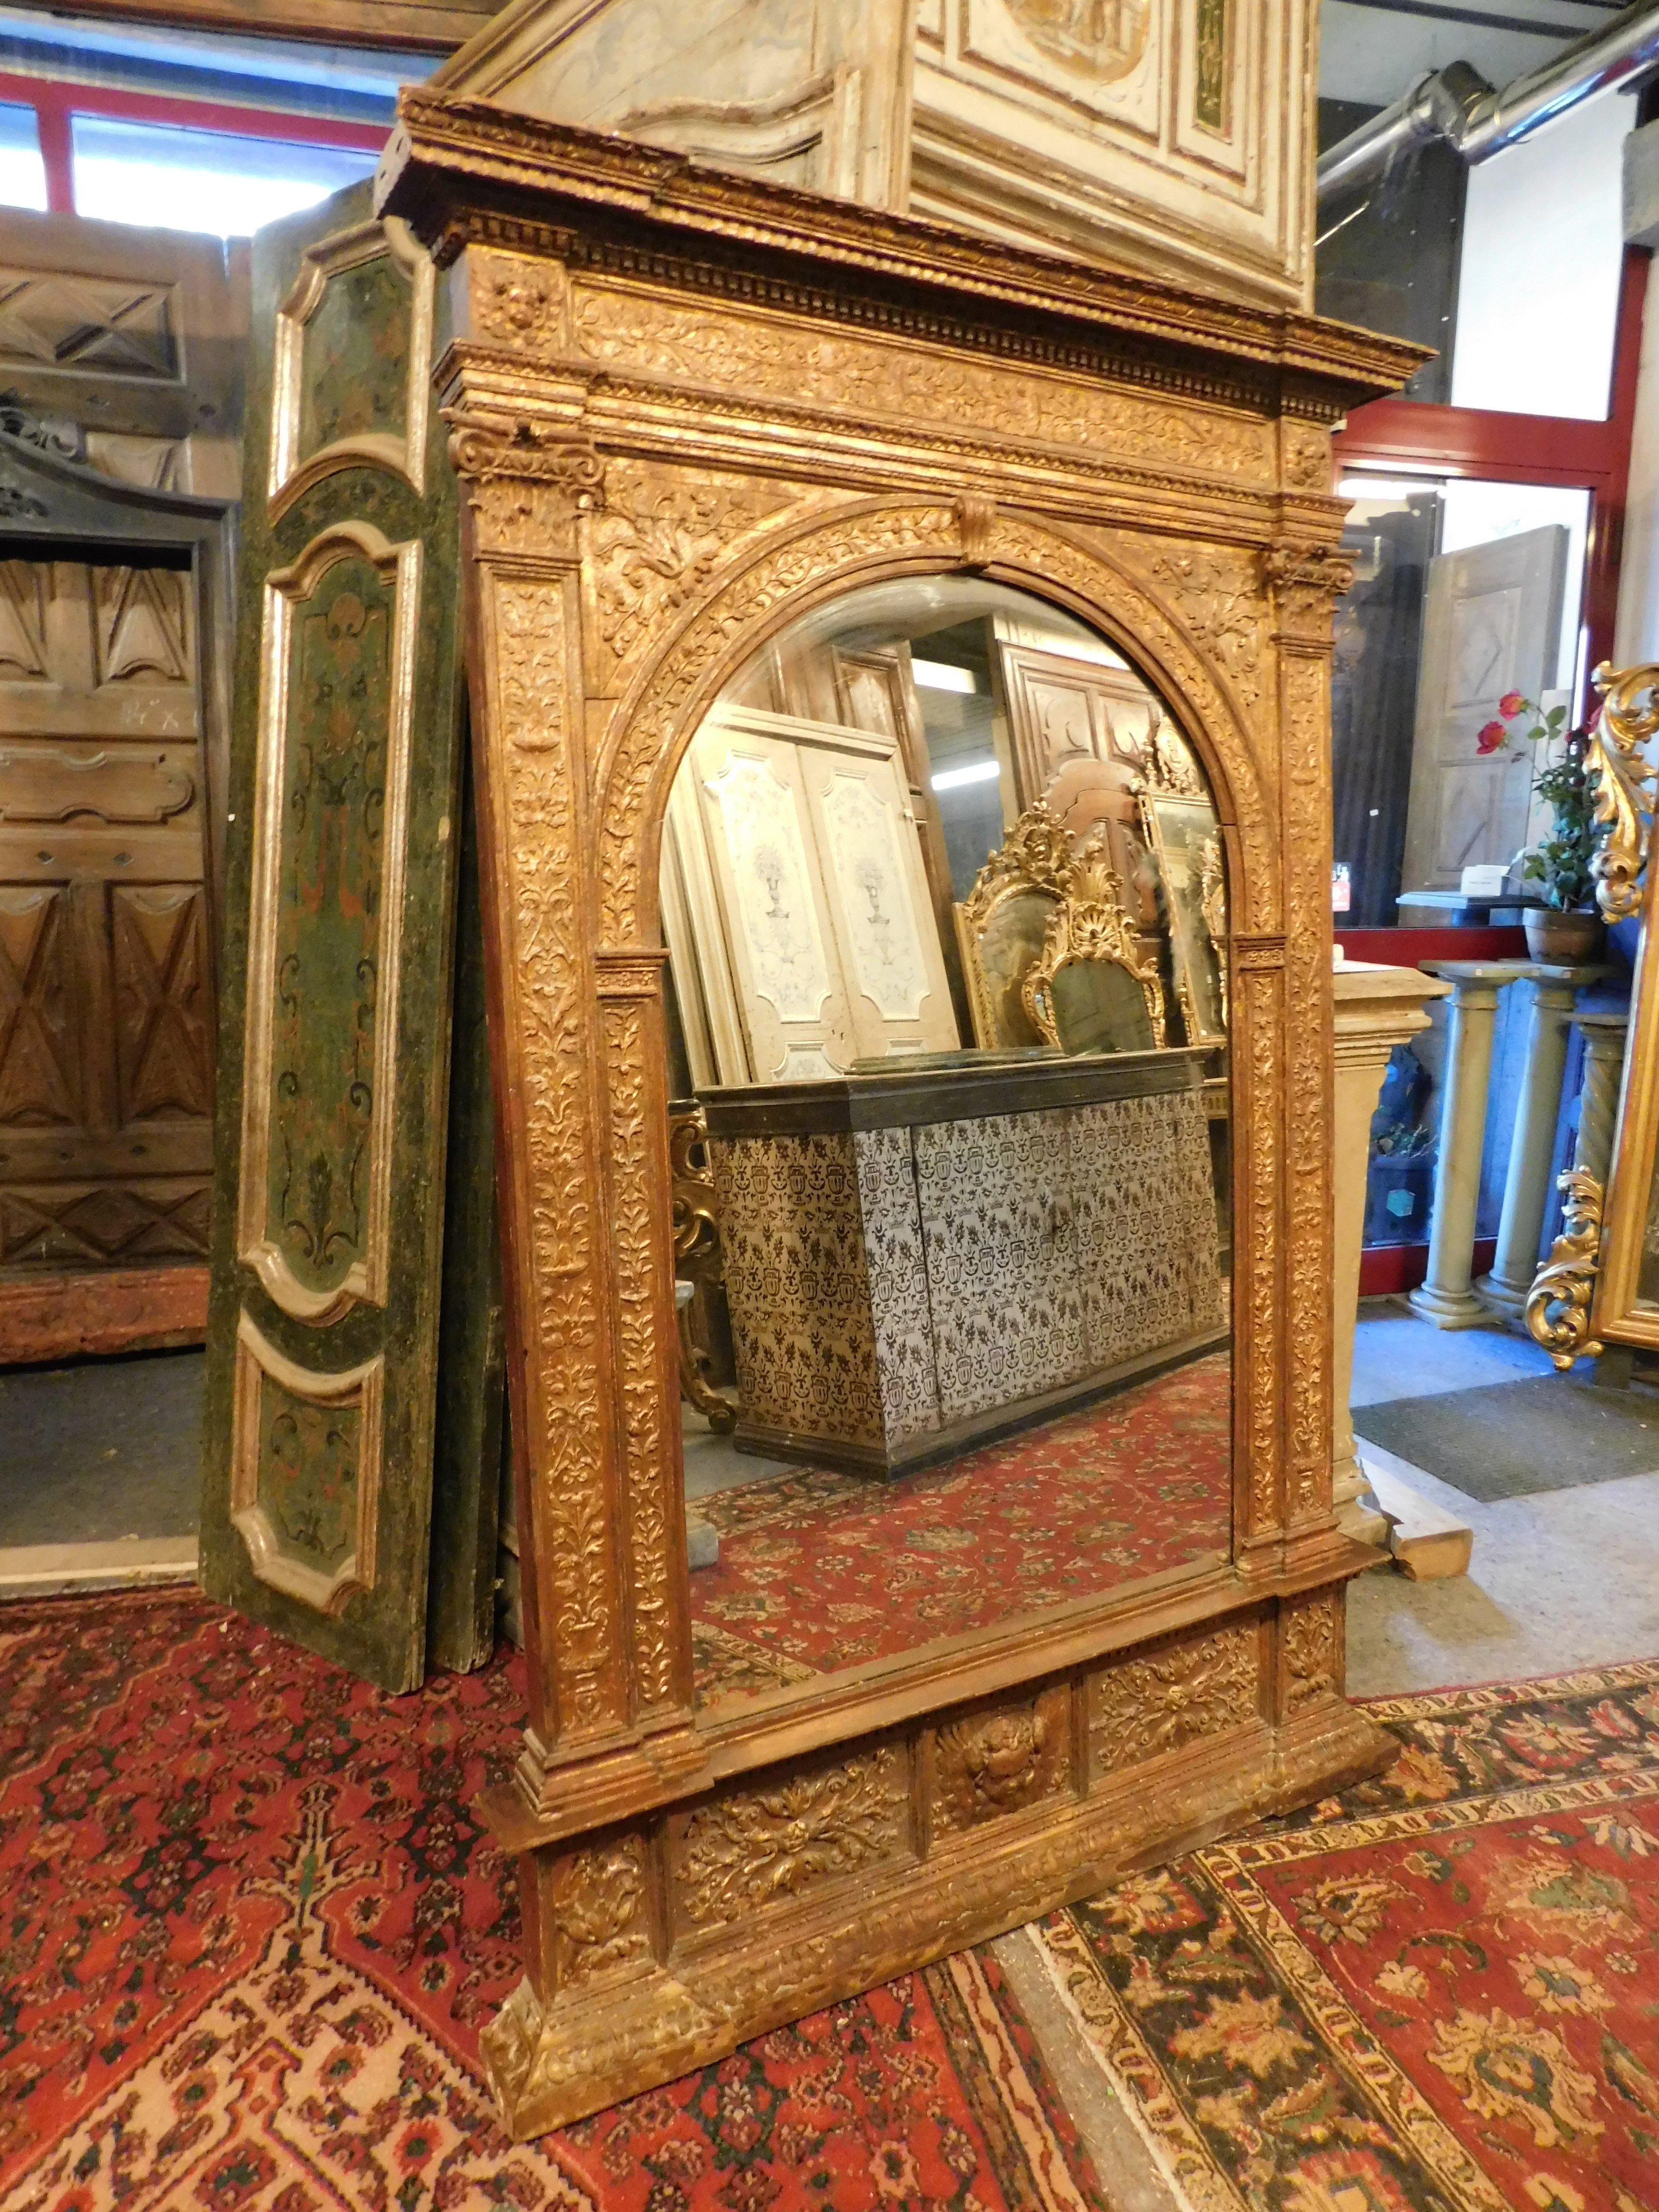 Antique rectangular gilded and richly hand-sculpted floor mirror with wooden frame, built in the middle of the 19th century for a palace in Italy (Florence).
maximum external measurements in cm w 136 x H 198, with protruding hat and arched mirror,